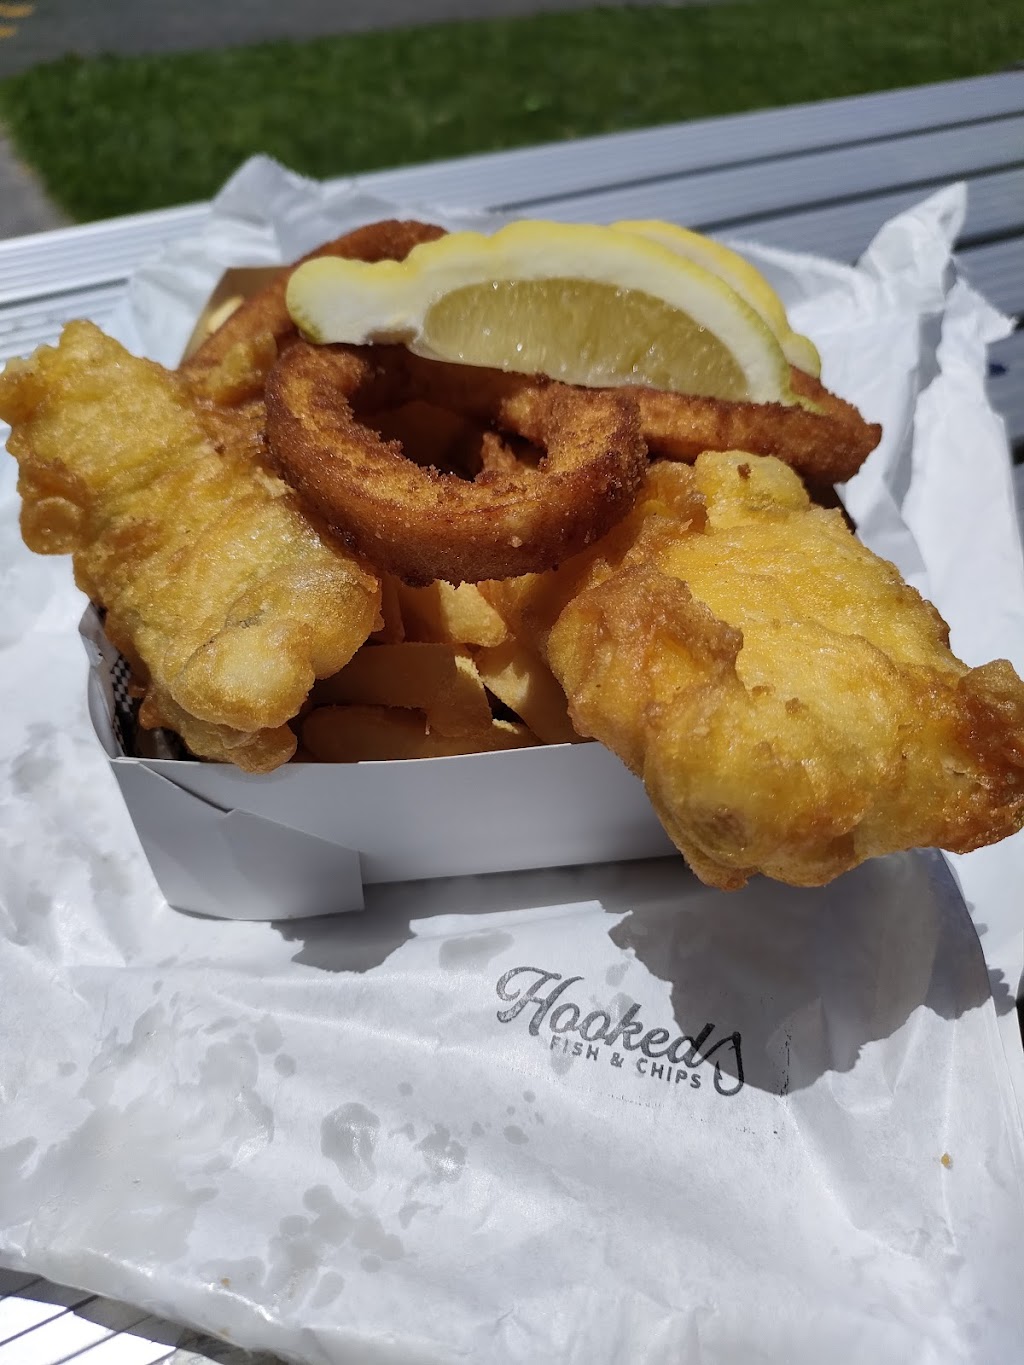 Hooked Fish and Chips | restaurant | 5 Addison St, Shellharbour NSW 2529, Australia | 0242386430 OR +61 2 4238 6430